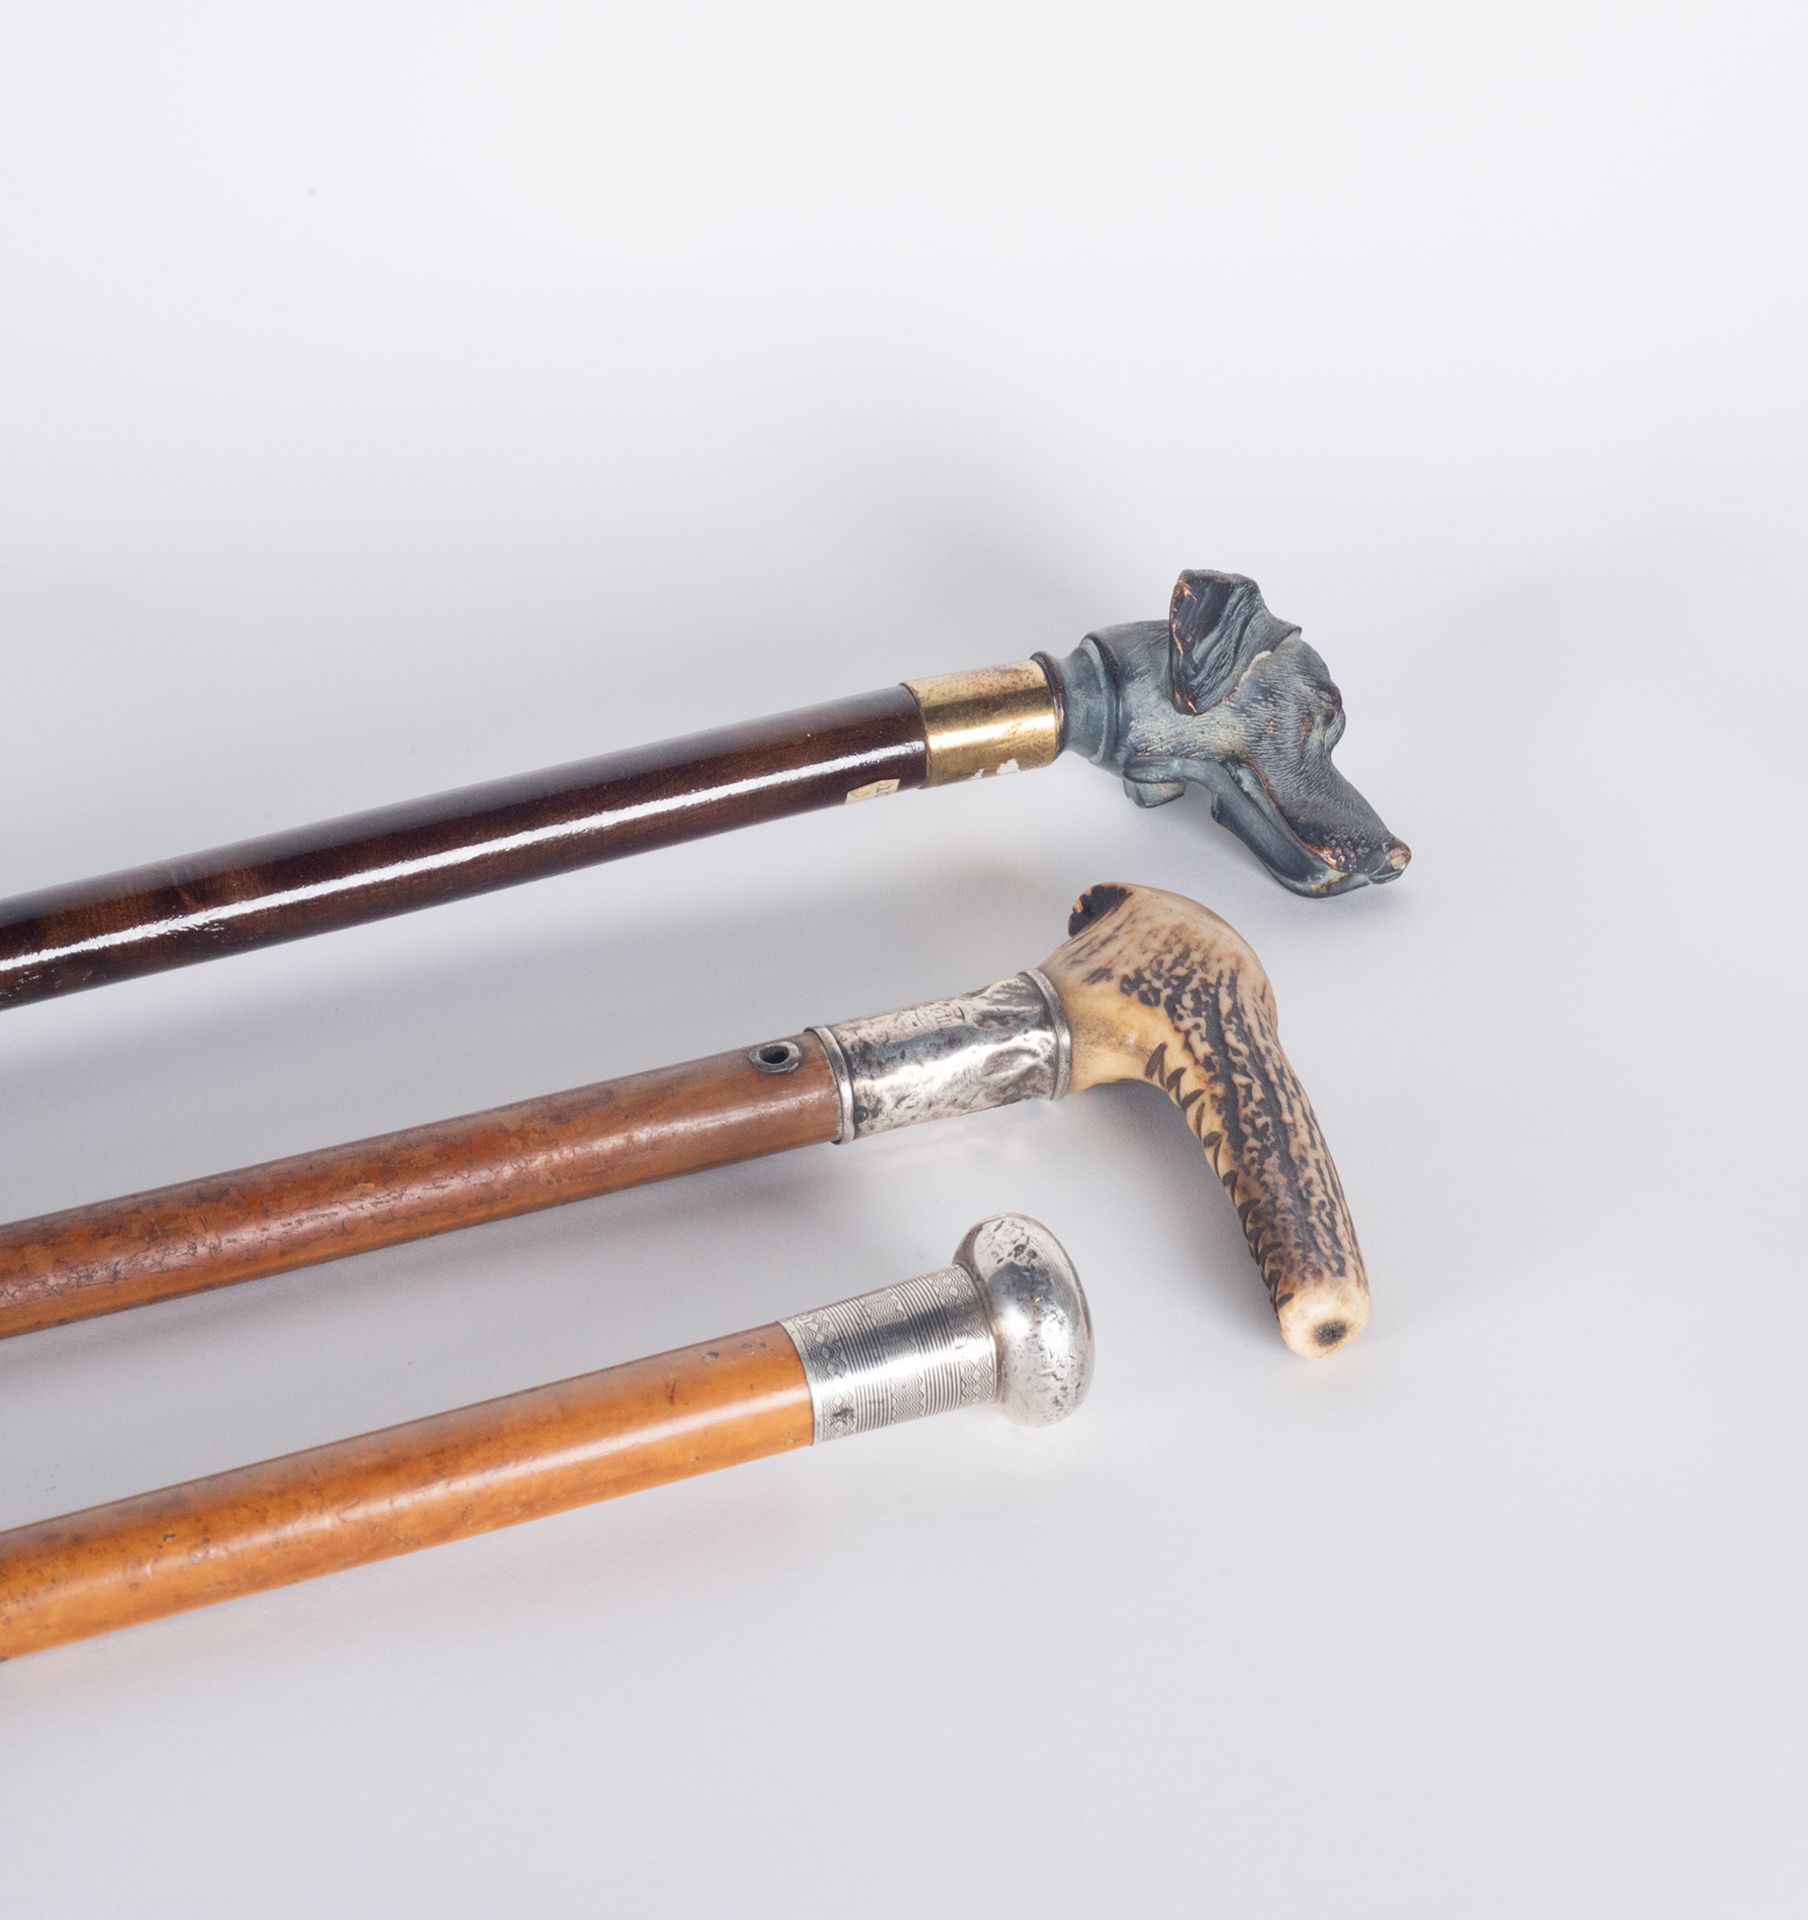 Lot of 3 Walking Sticks, two with silver-finished handles, 19th to 20th centuries - Image 2 of 2